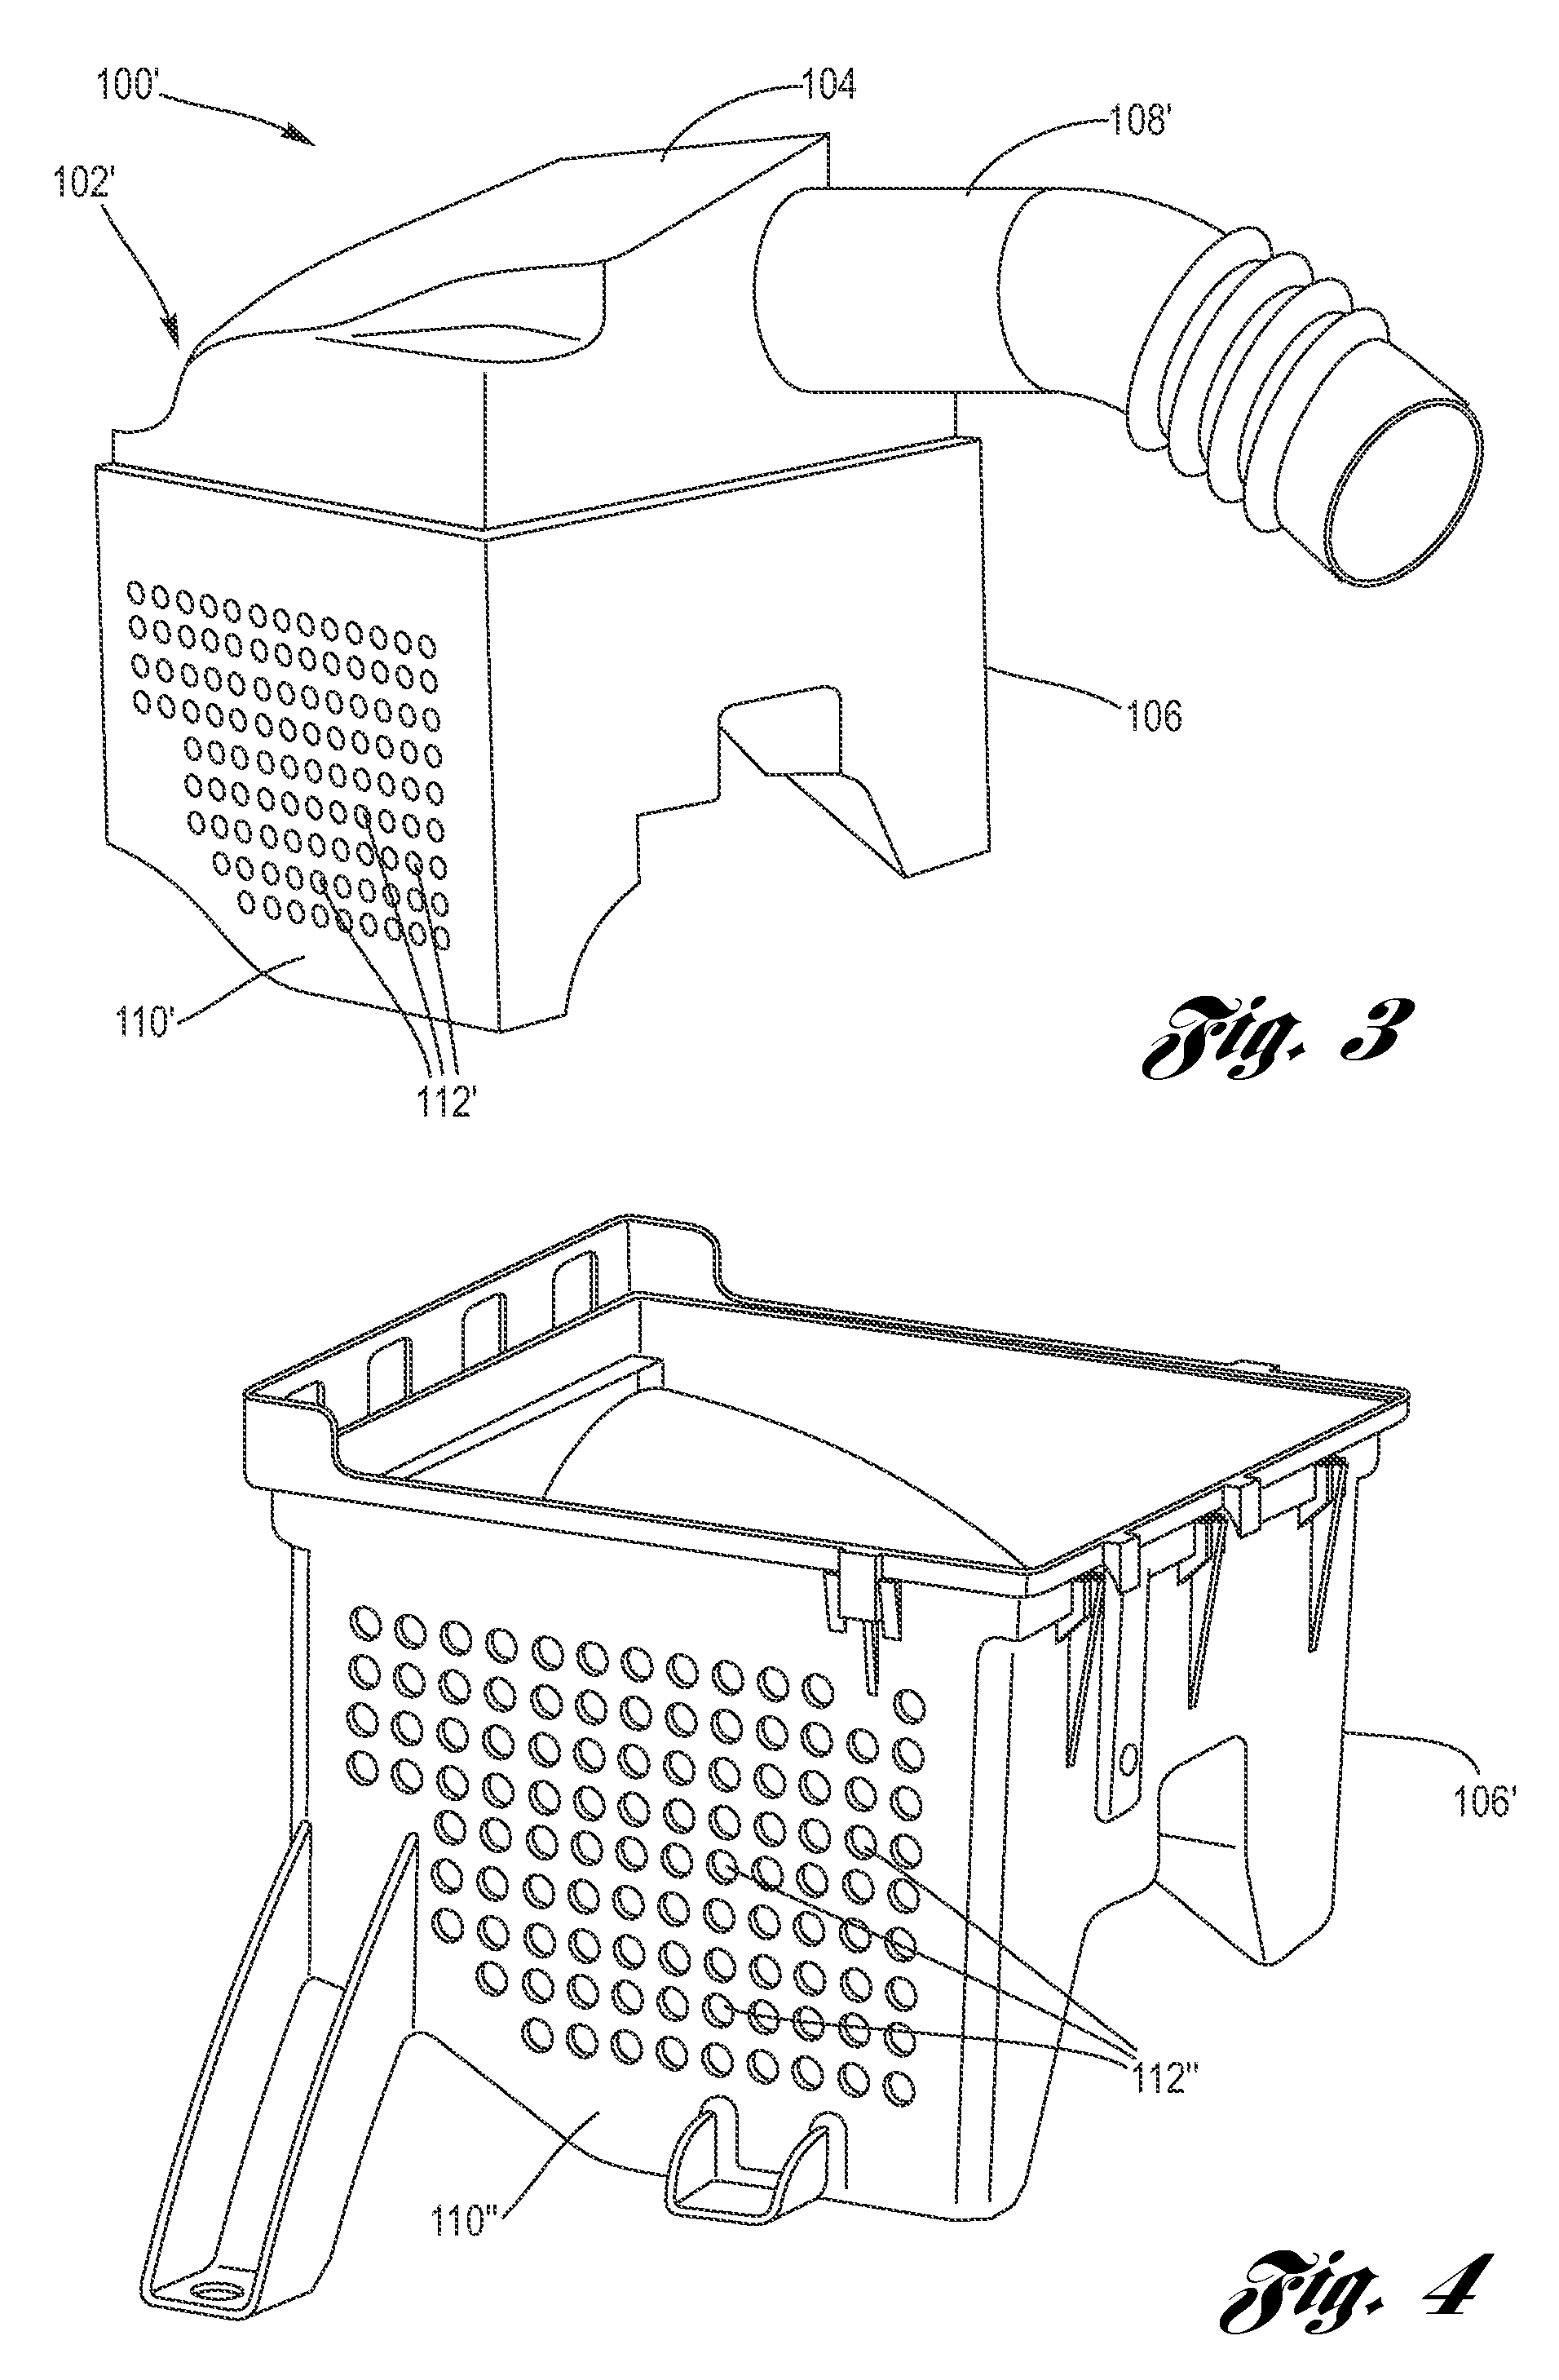 Air induction housing having a perforated sound attenuation wall